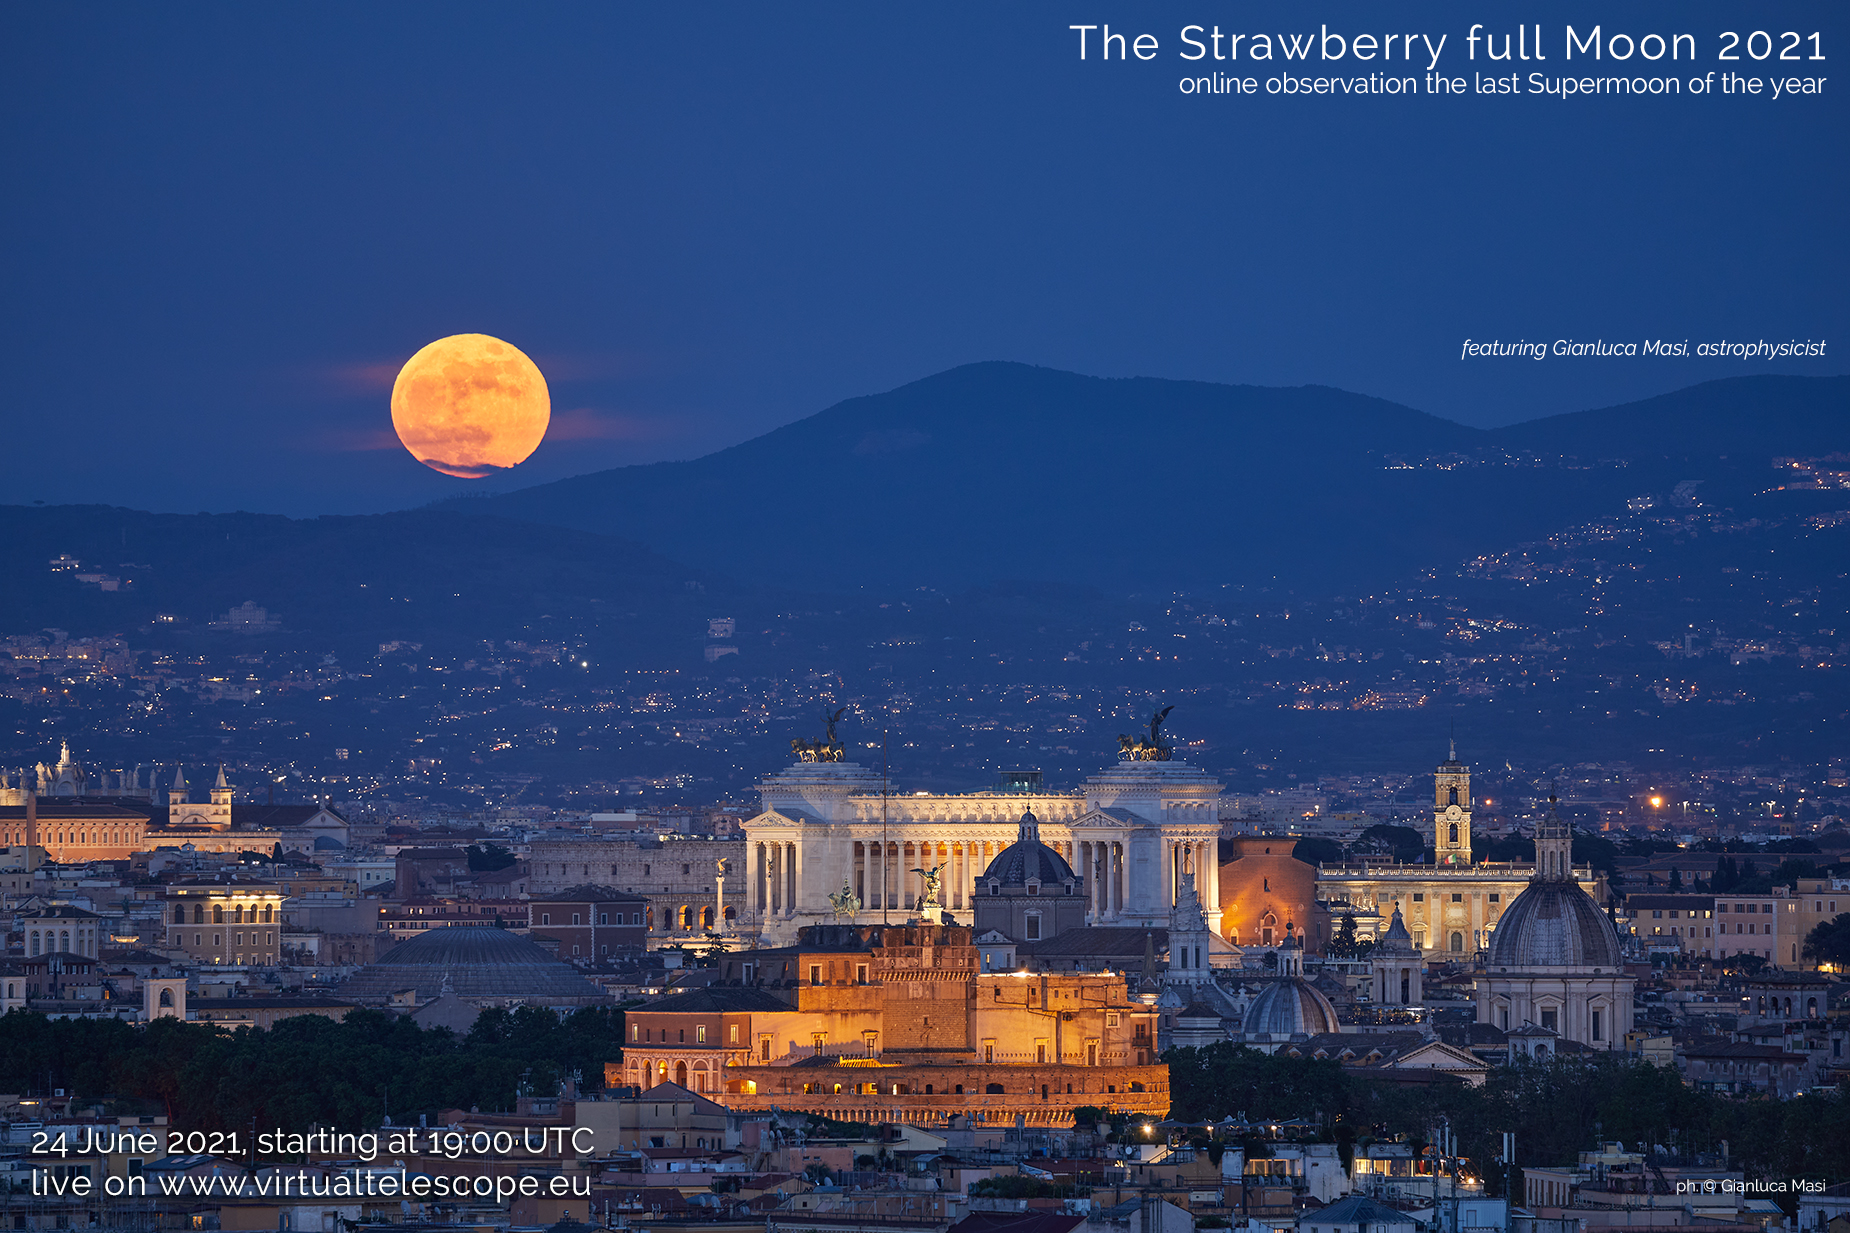 The June 2021 Strawberry Supermoon - poster of the event.